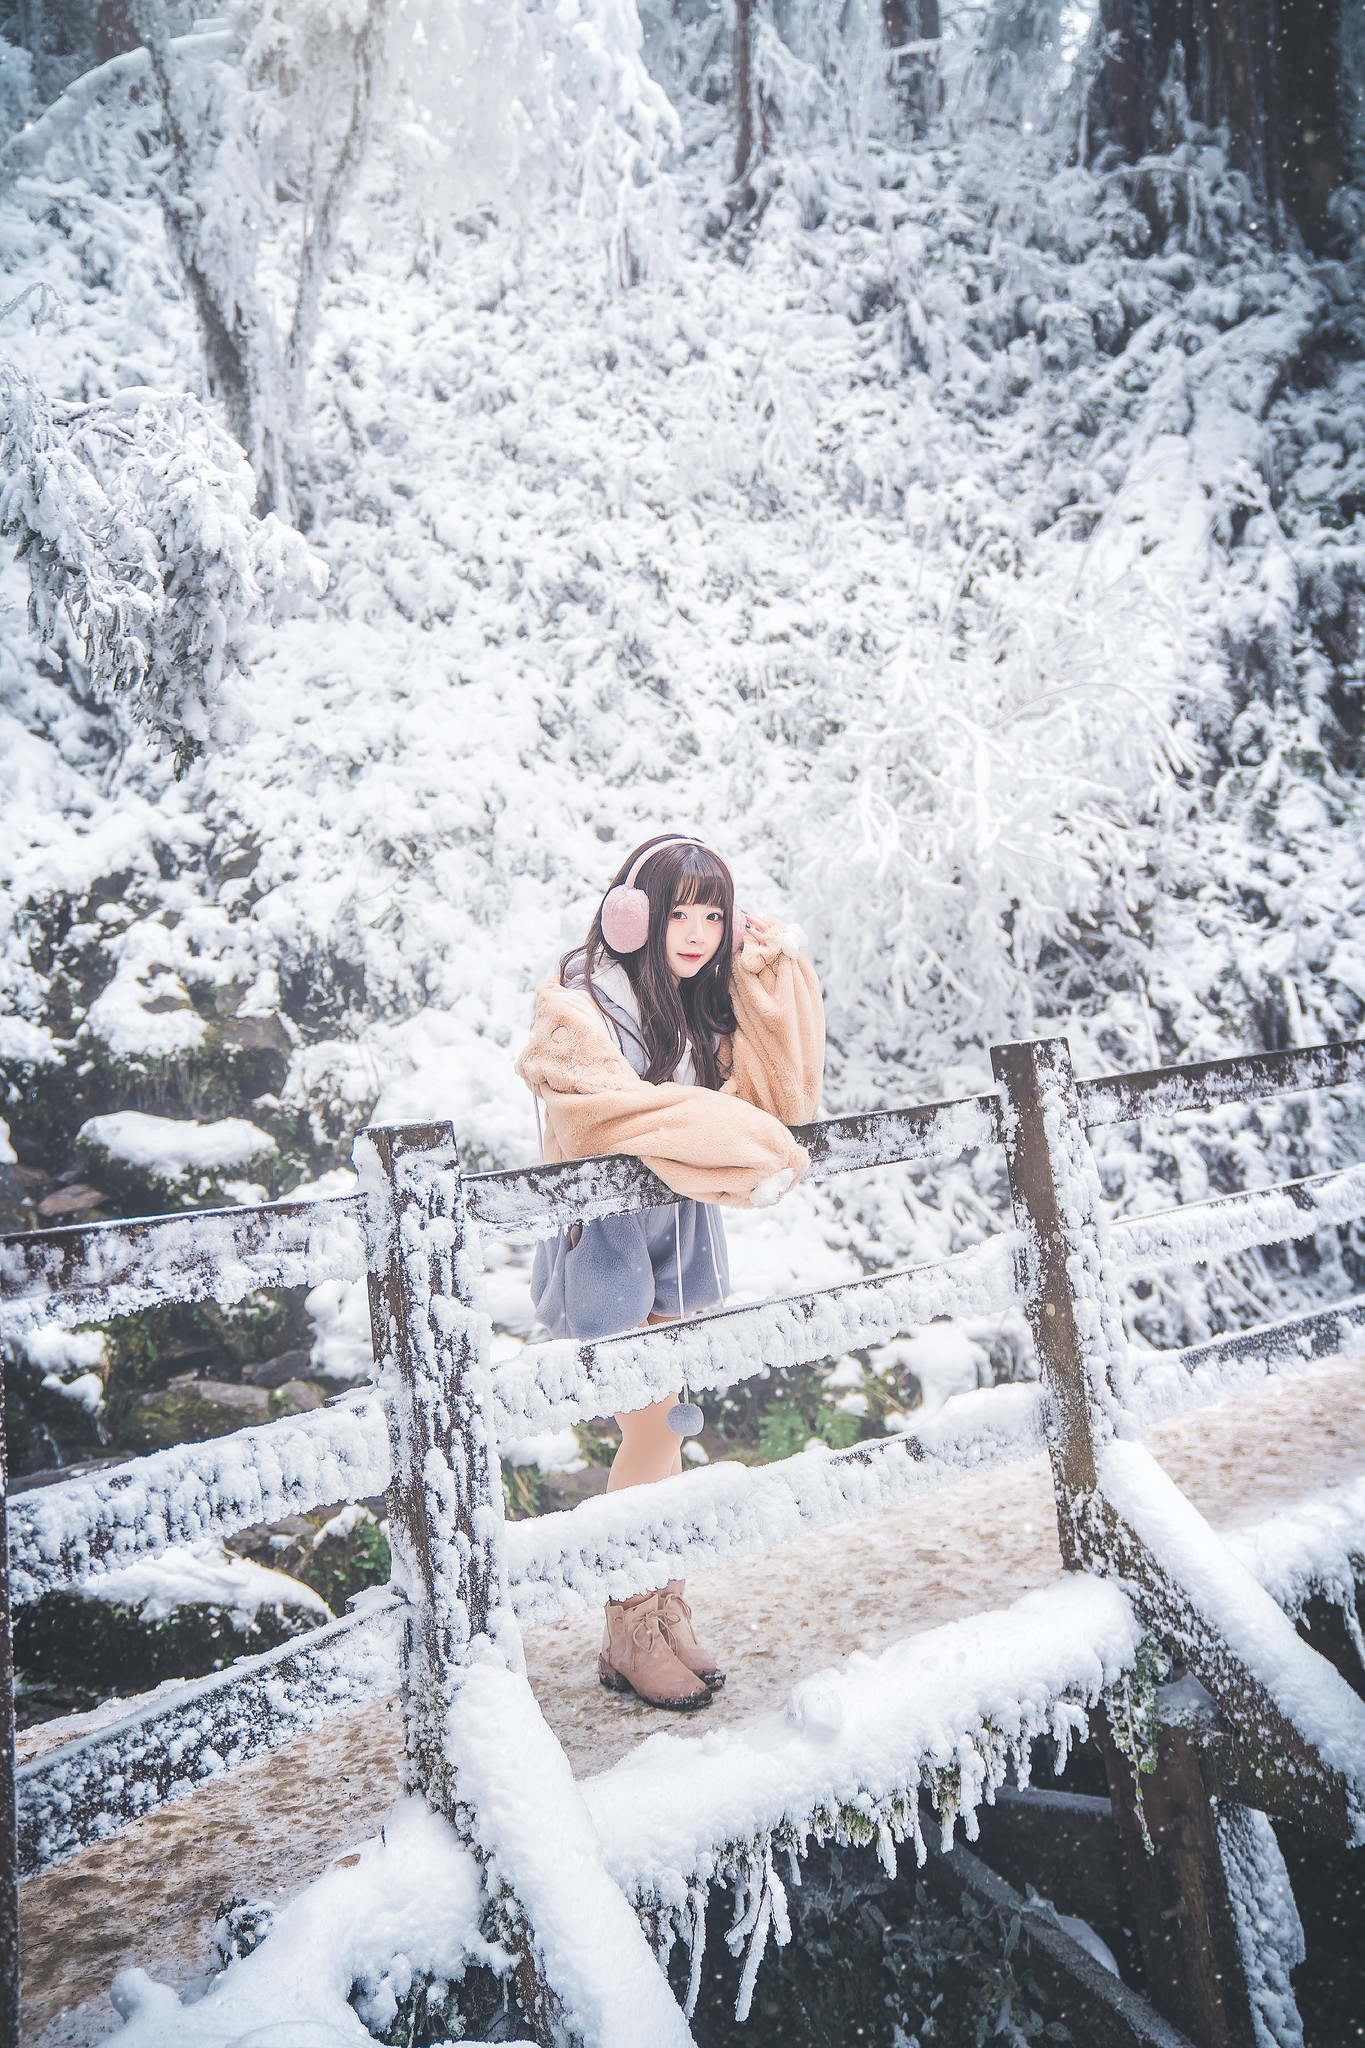 Women Asian Leaning Outdoors Looking At Viewer Women Outdoors Cold Snow Trees Winter Long Hair 1365x2048